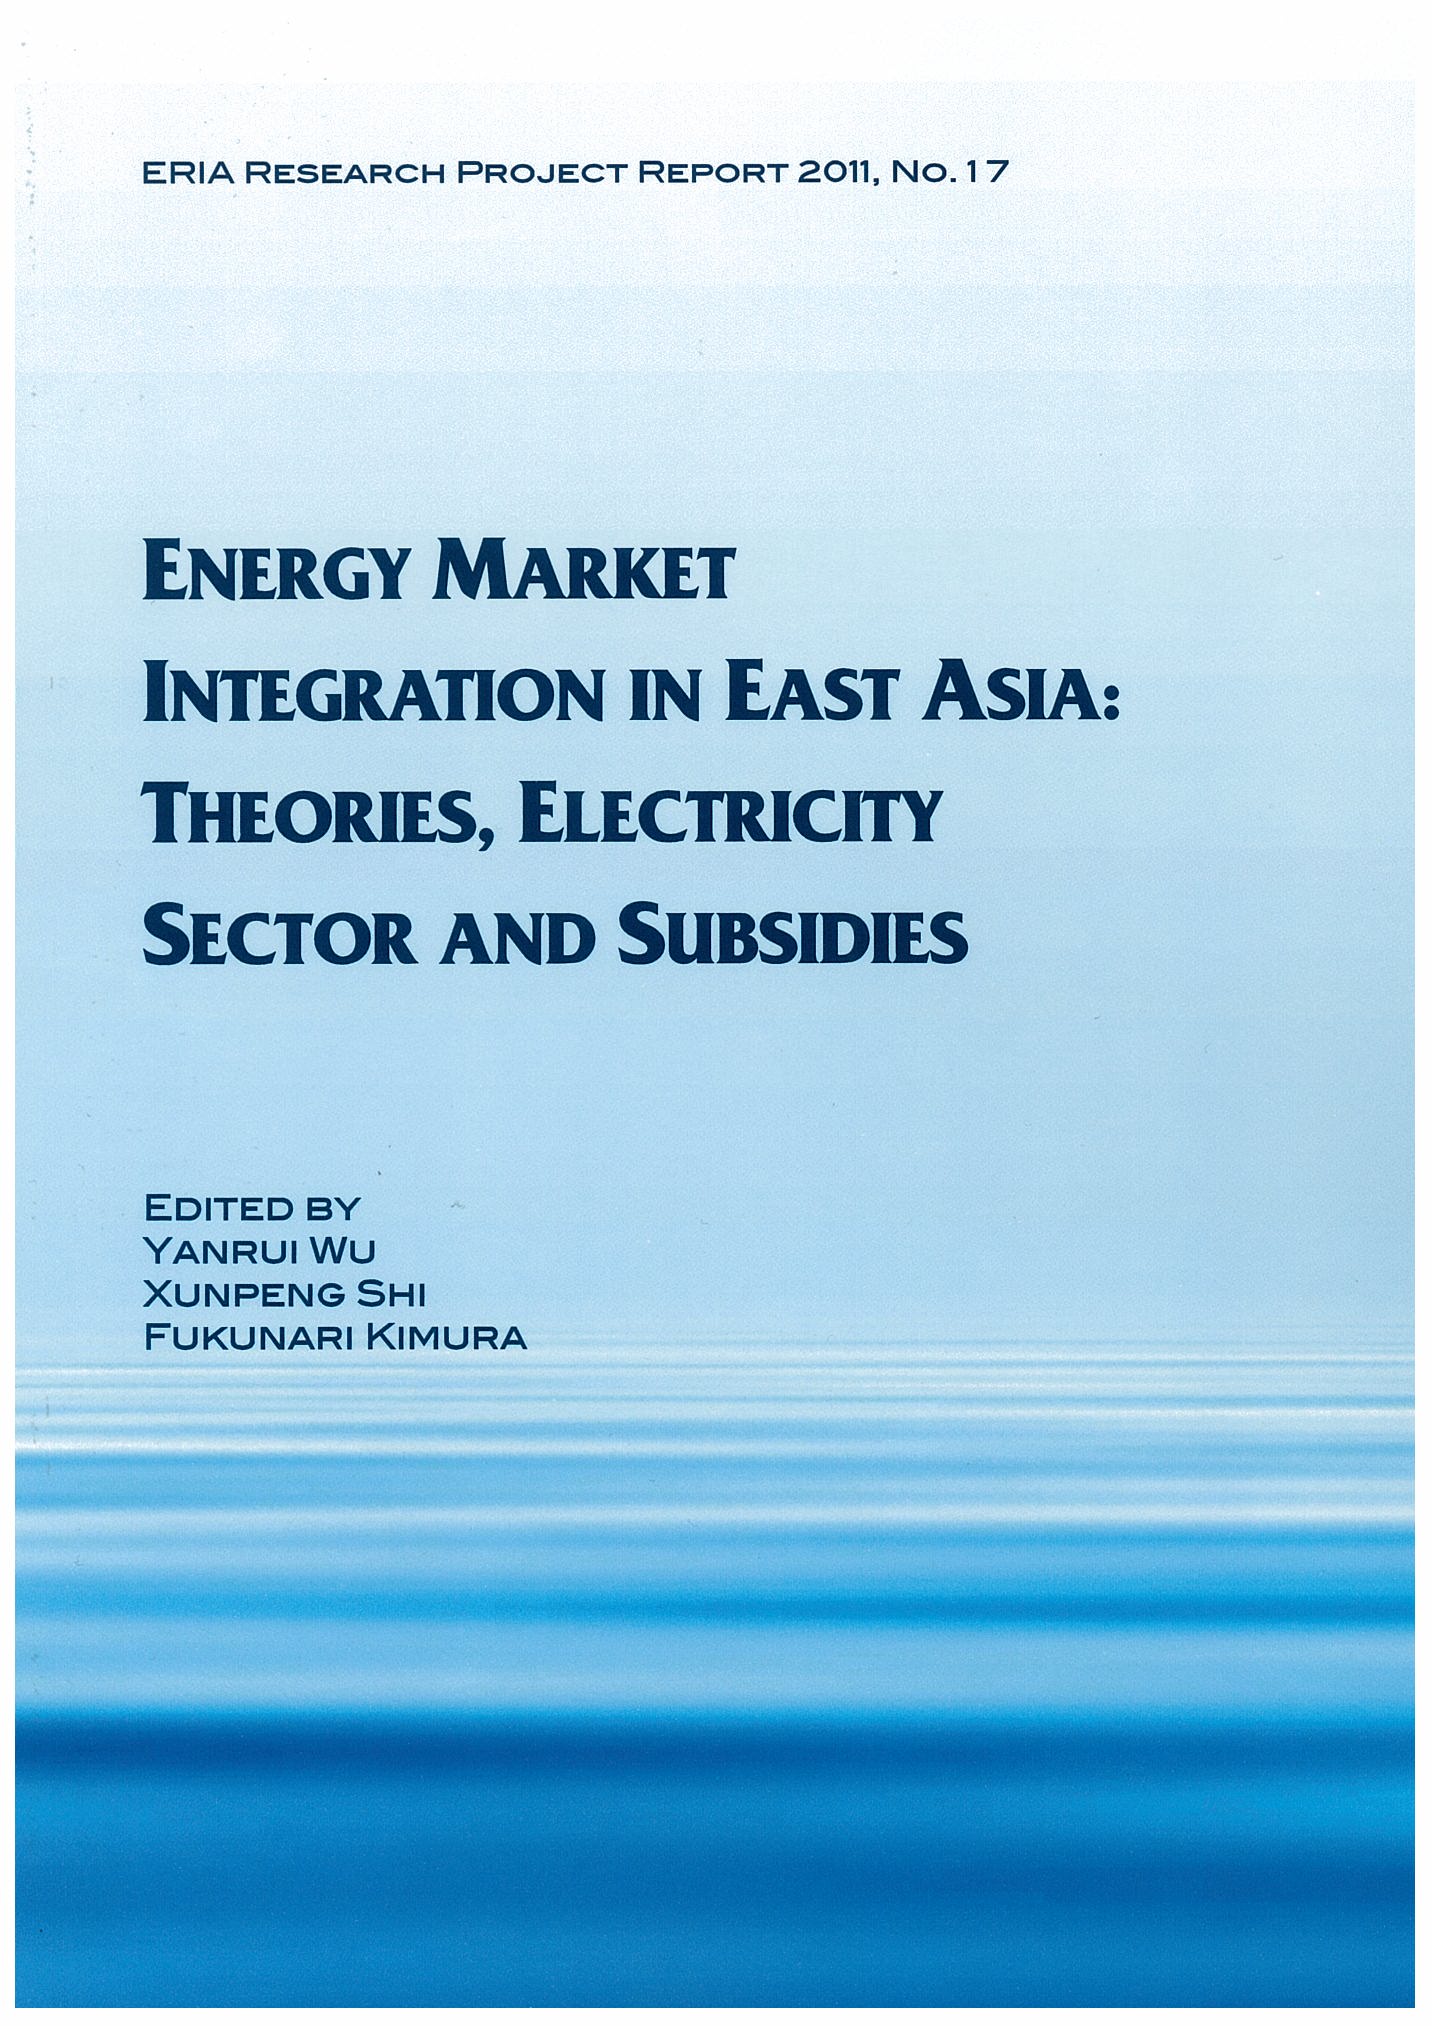 Energy Market Integration in East Asia: Theories, Electricity Sector and Subsidies